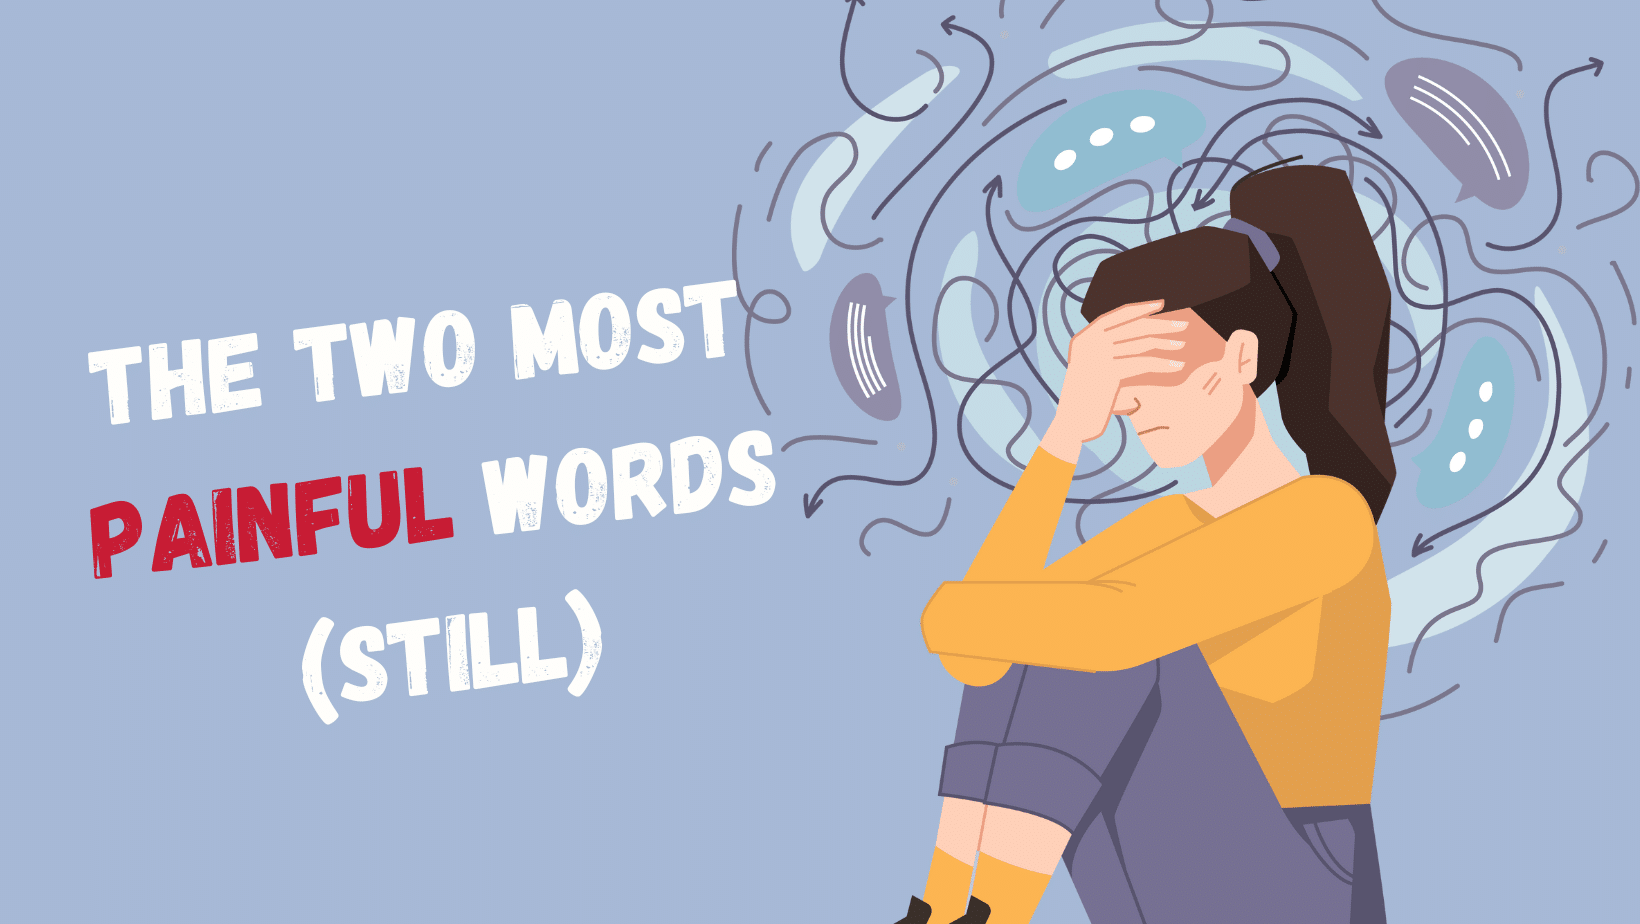 Featured image for “The Two Most Painful Words (Still)”